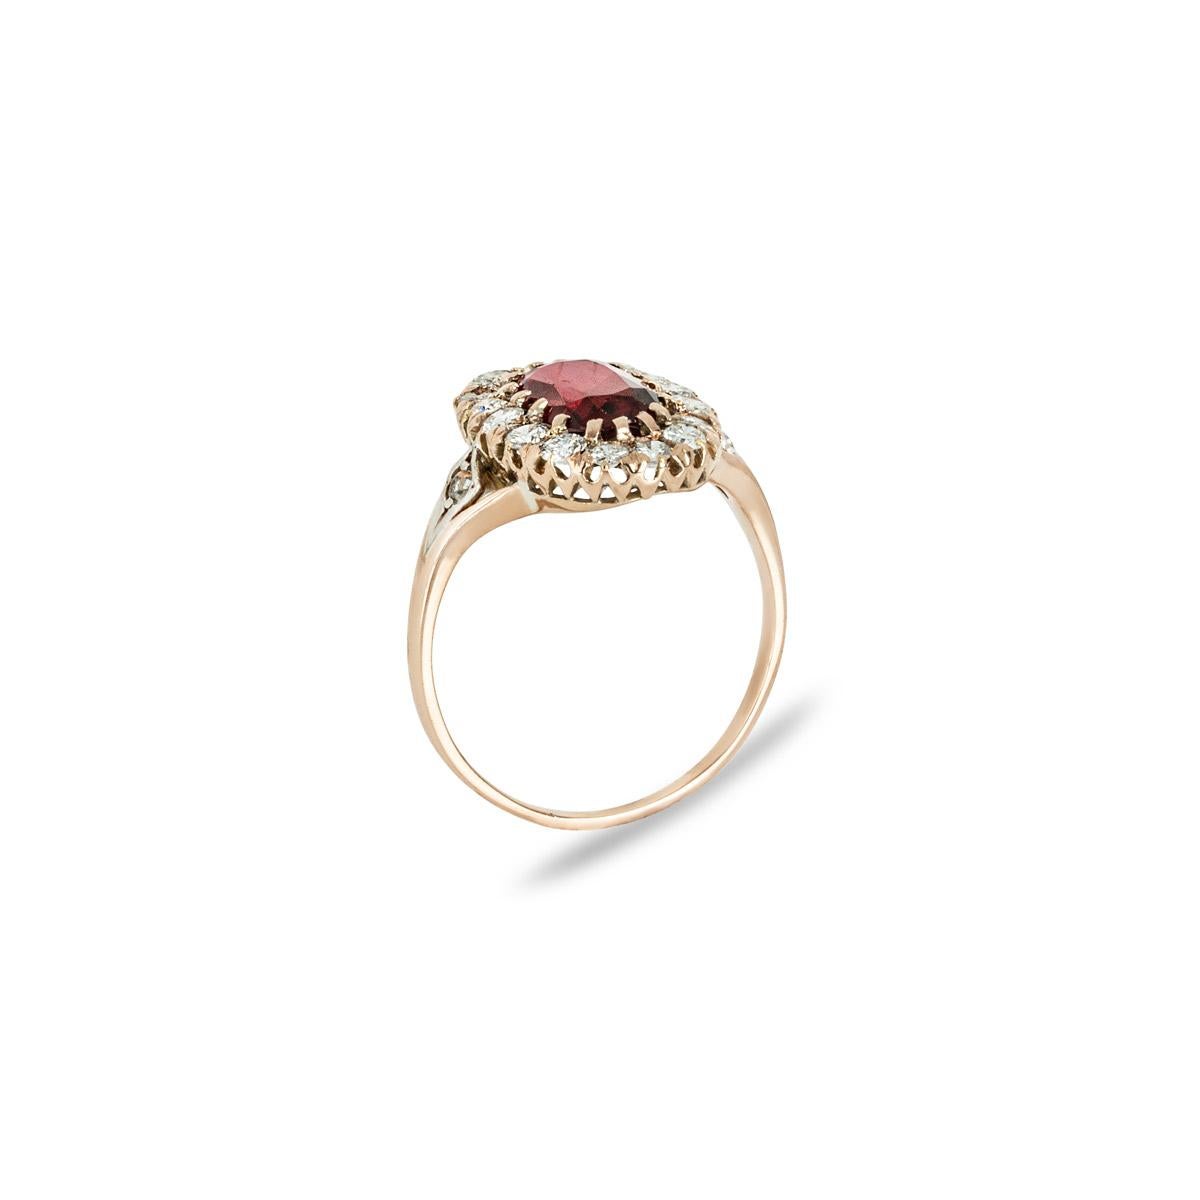 A striking 18k rose gold spinel and diamond dress ring. The ring features an unheated oval cut spinel set to the centre weighing 2.22ct and displaying a darkish red hue. Surrounding the spinel are 16 round brilliant cut diamonds set in a halo with